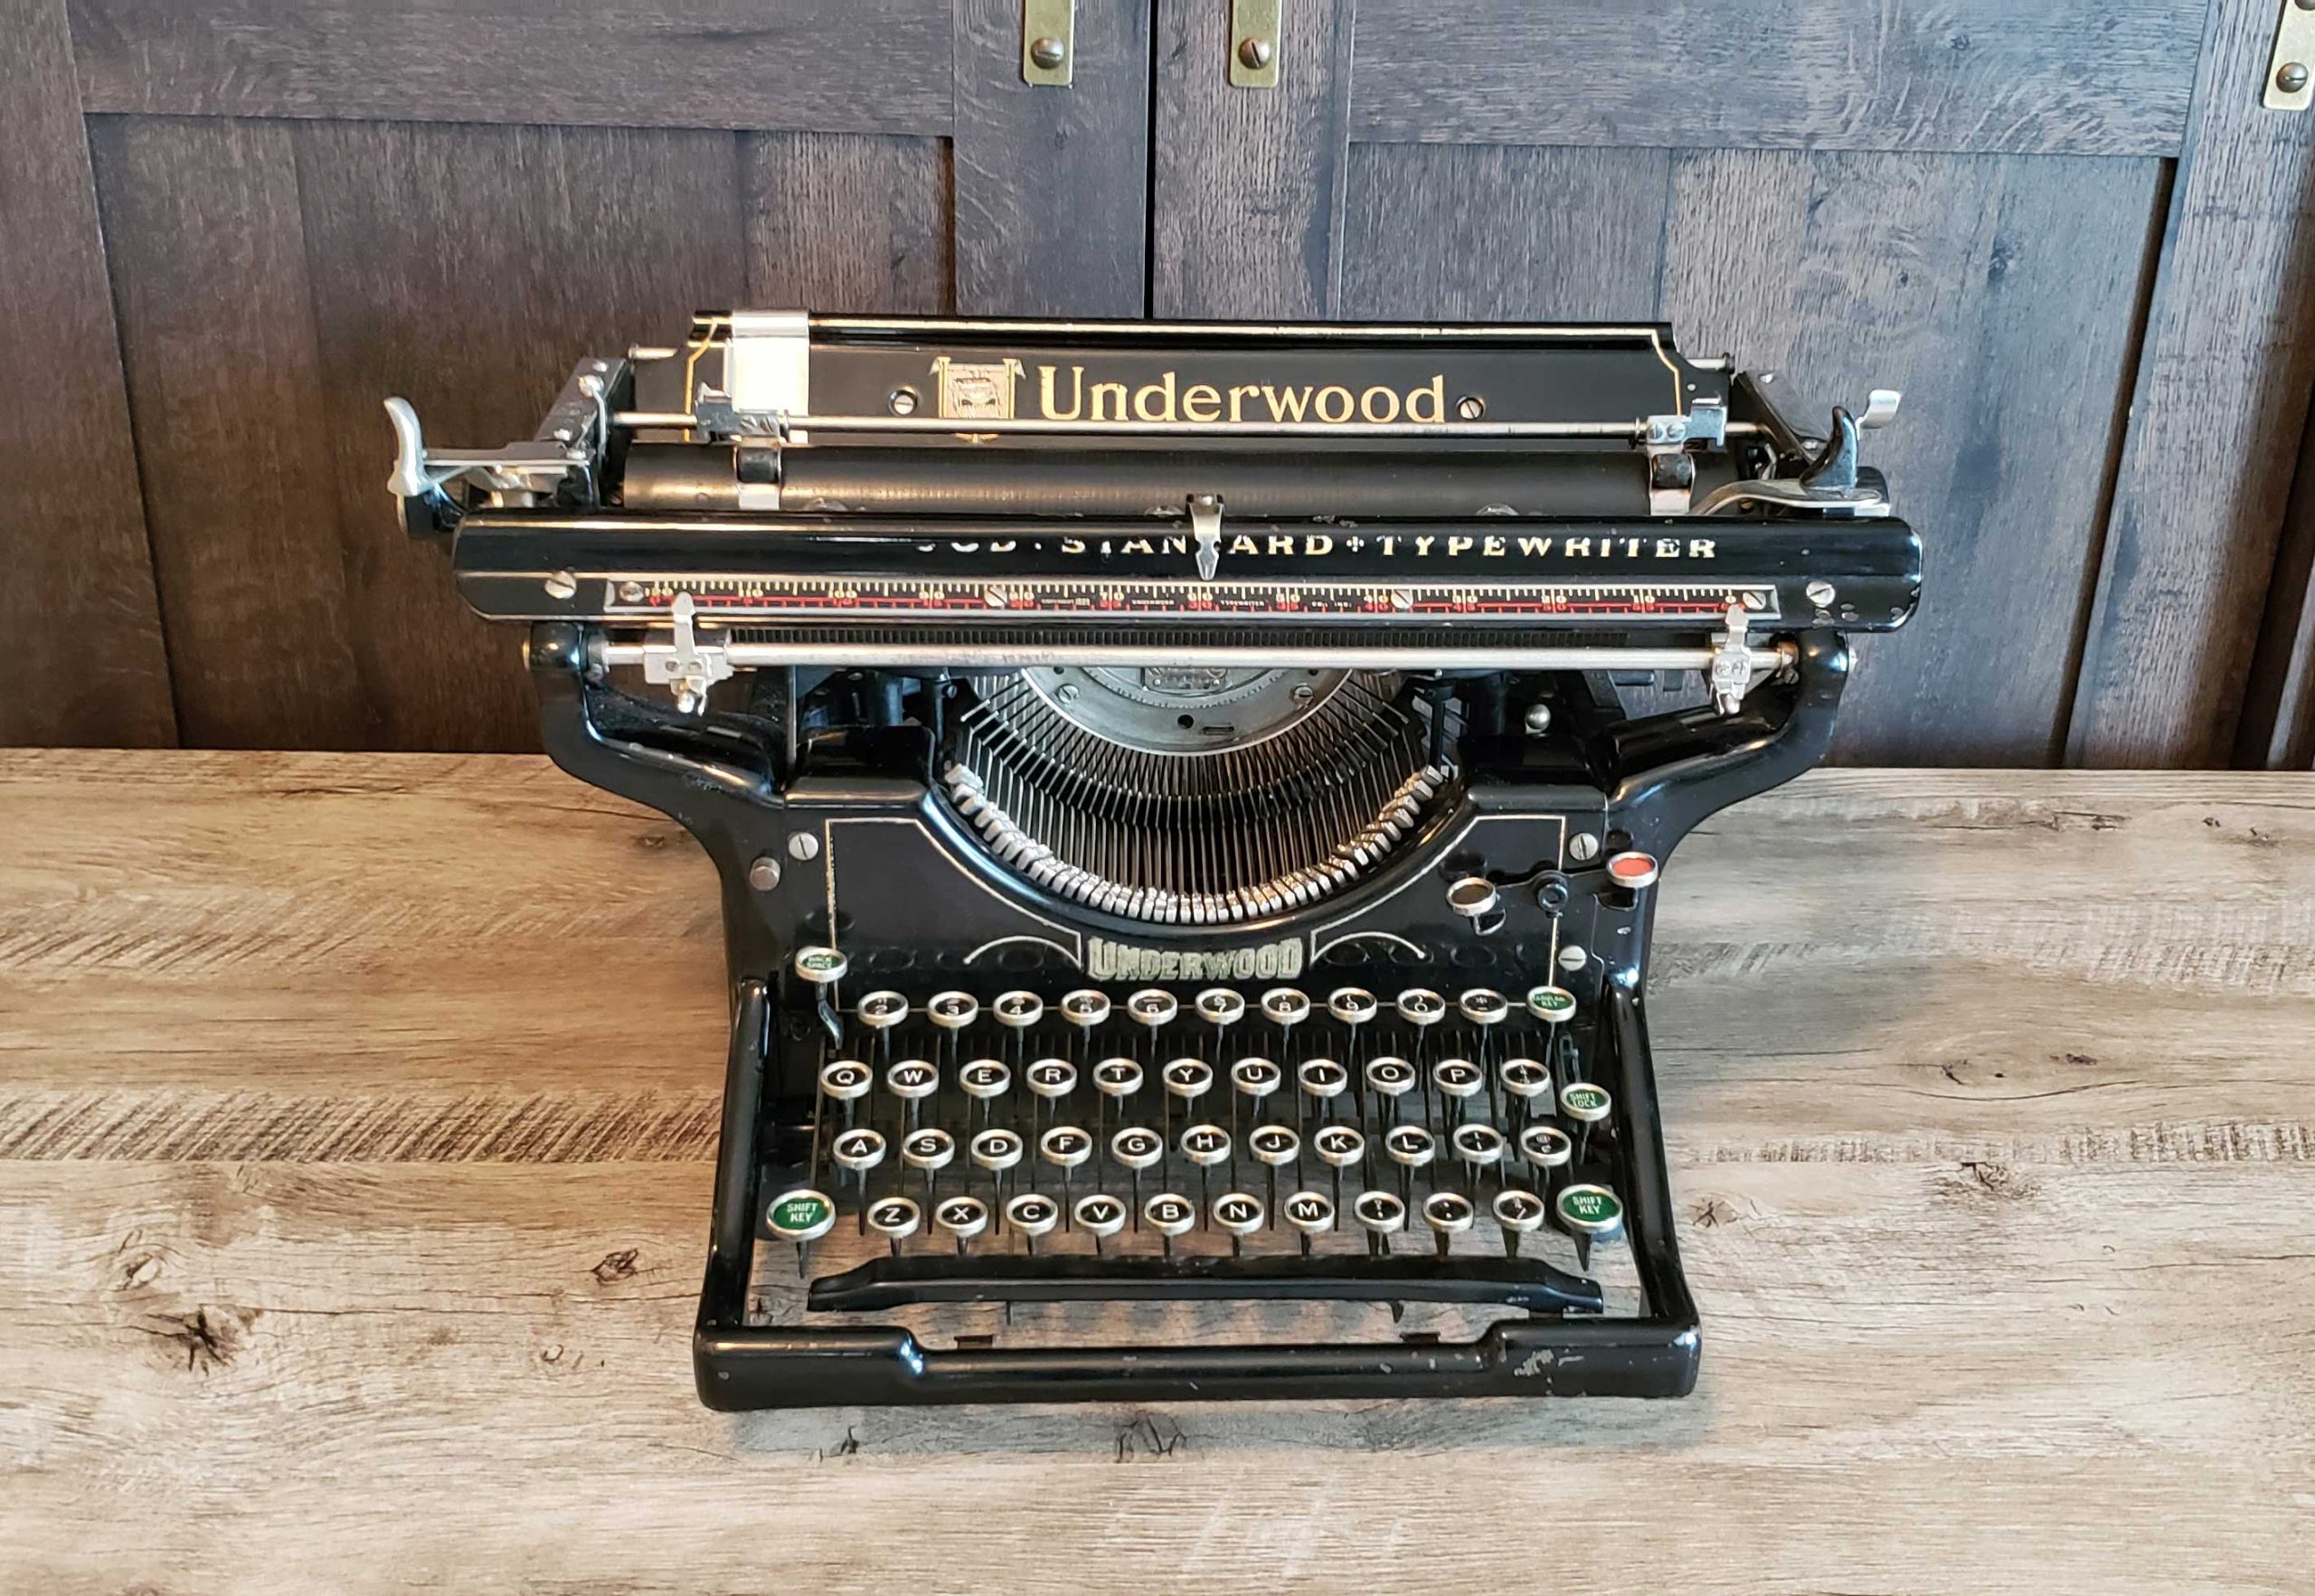 This 1922 Underwood Model K Typewriter was purchased at Glenwood Antique Mall in Overland Park, KS, and lovingly restored by the publisher’s daughter for her son’s birthday after he became obsessed while watching “Wednesday” on Netflix. (Image courtesy of Patti Klinge)